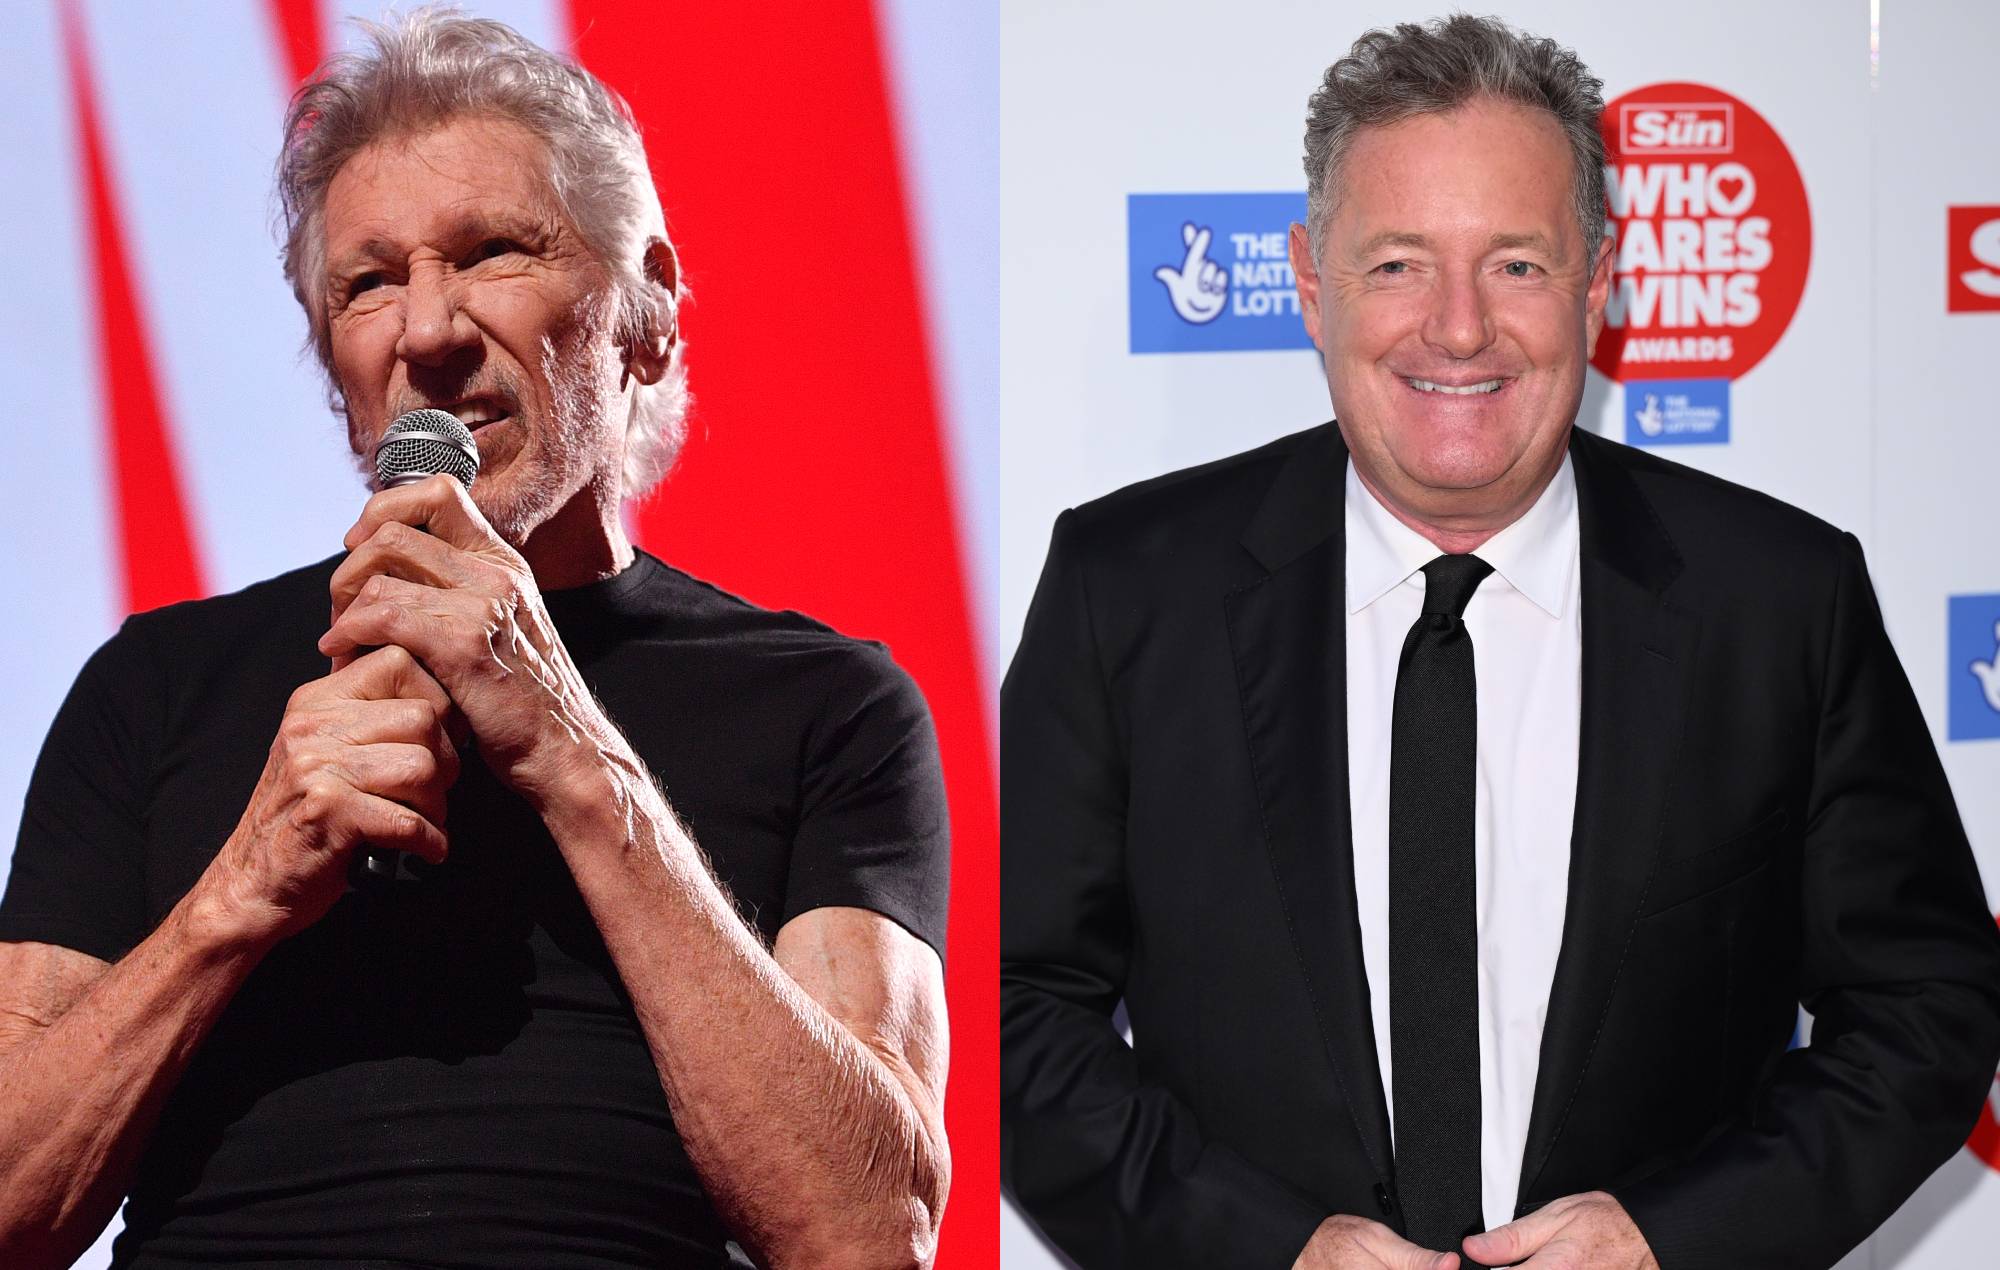 Roger Waters and Piers Morgan clash over anti-Semitism claims and Israel Palestine conflict after being called “world’s dumbest rockstar”